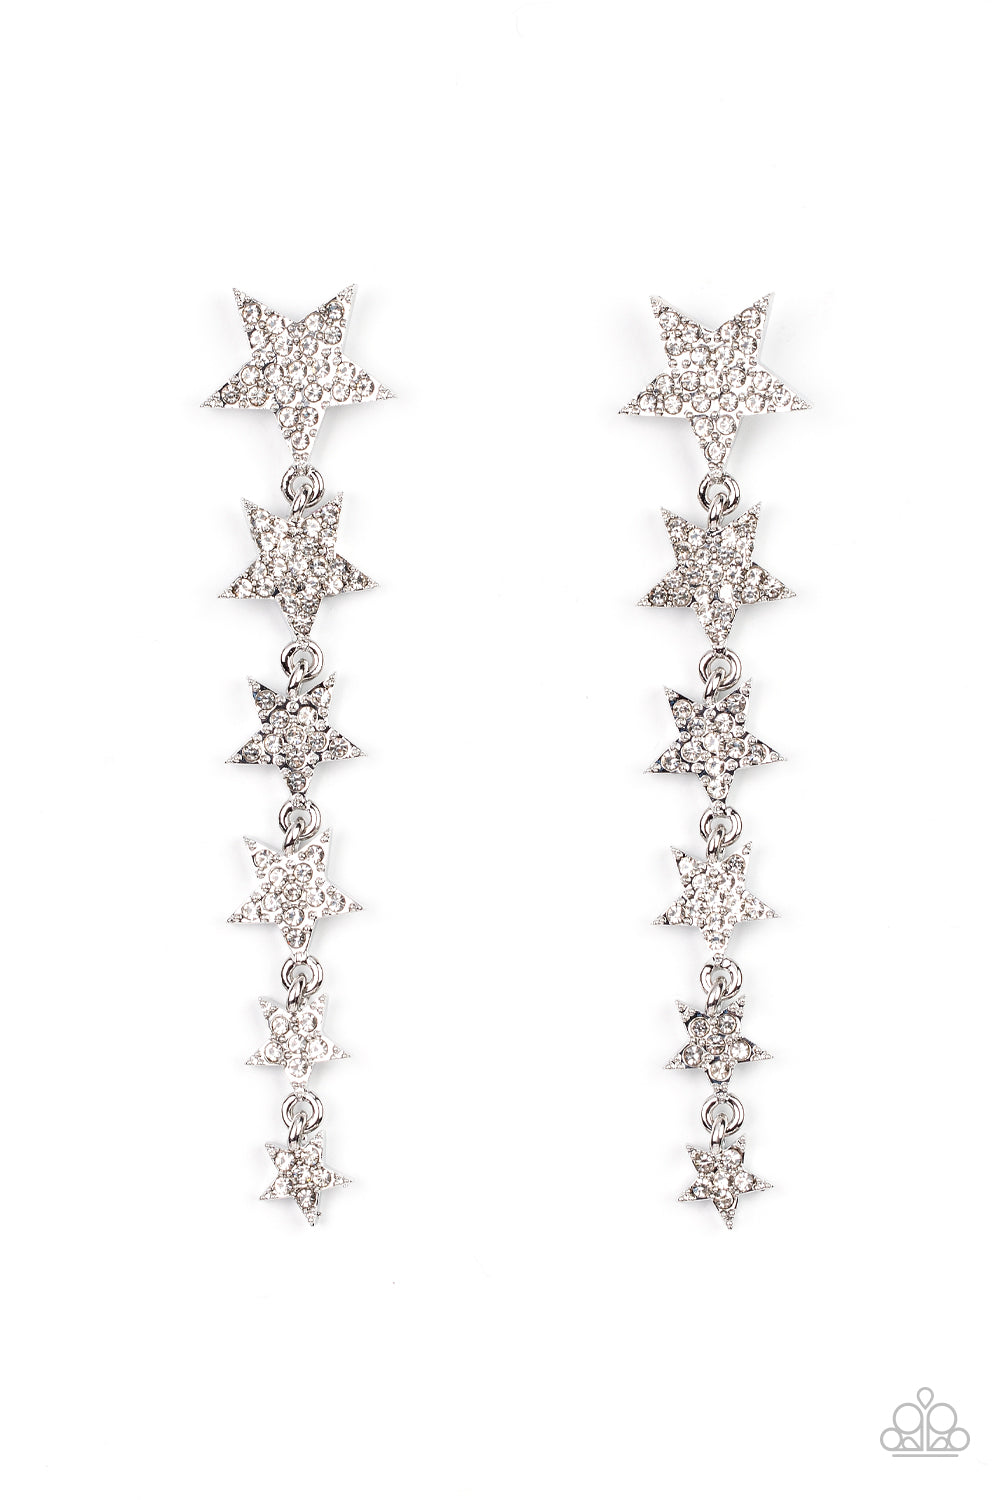 Americana Attitude White Rhinestone Star Post Earring - Paparazzi Accessories  Dotted with dainty white rhinestones, a stellar collection of silver stars graduate in size as they cascade from the ear for an out-of-this-world fashion. Earring attaches to a standard post fitting.  Featured inside The Preview at GLOW! Sold as one pair of post earrings.  New KitNew Kit